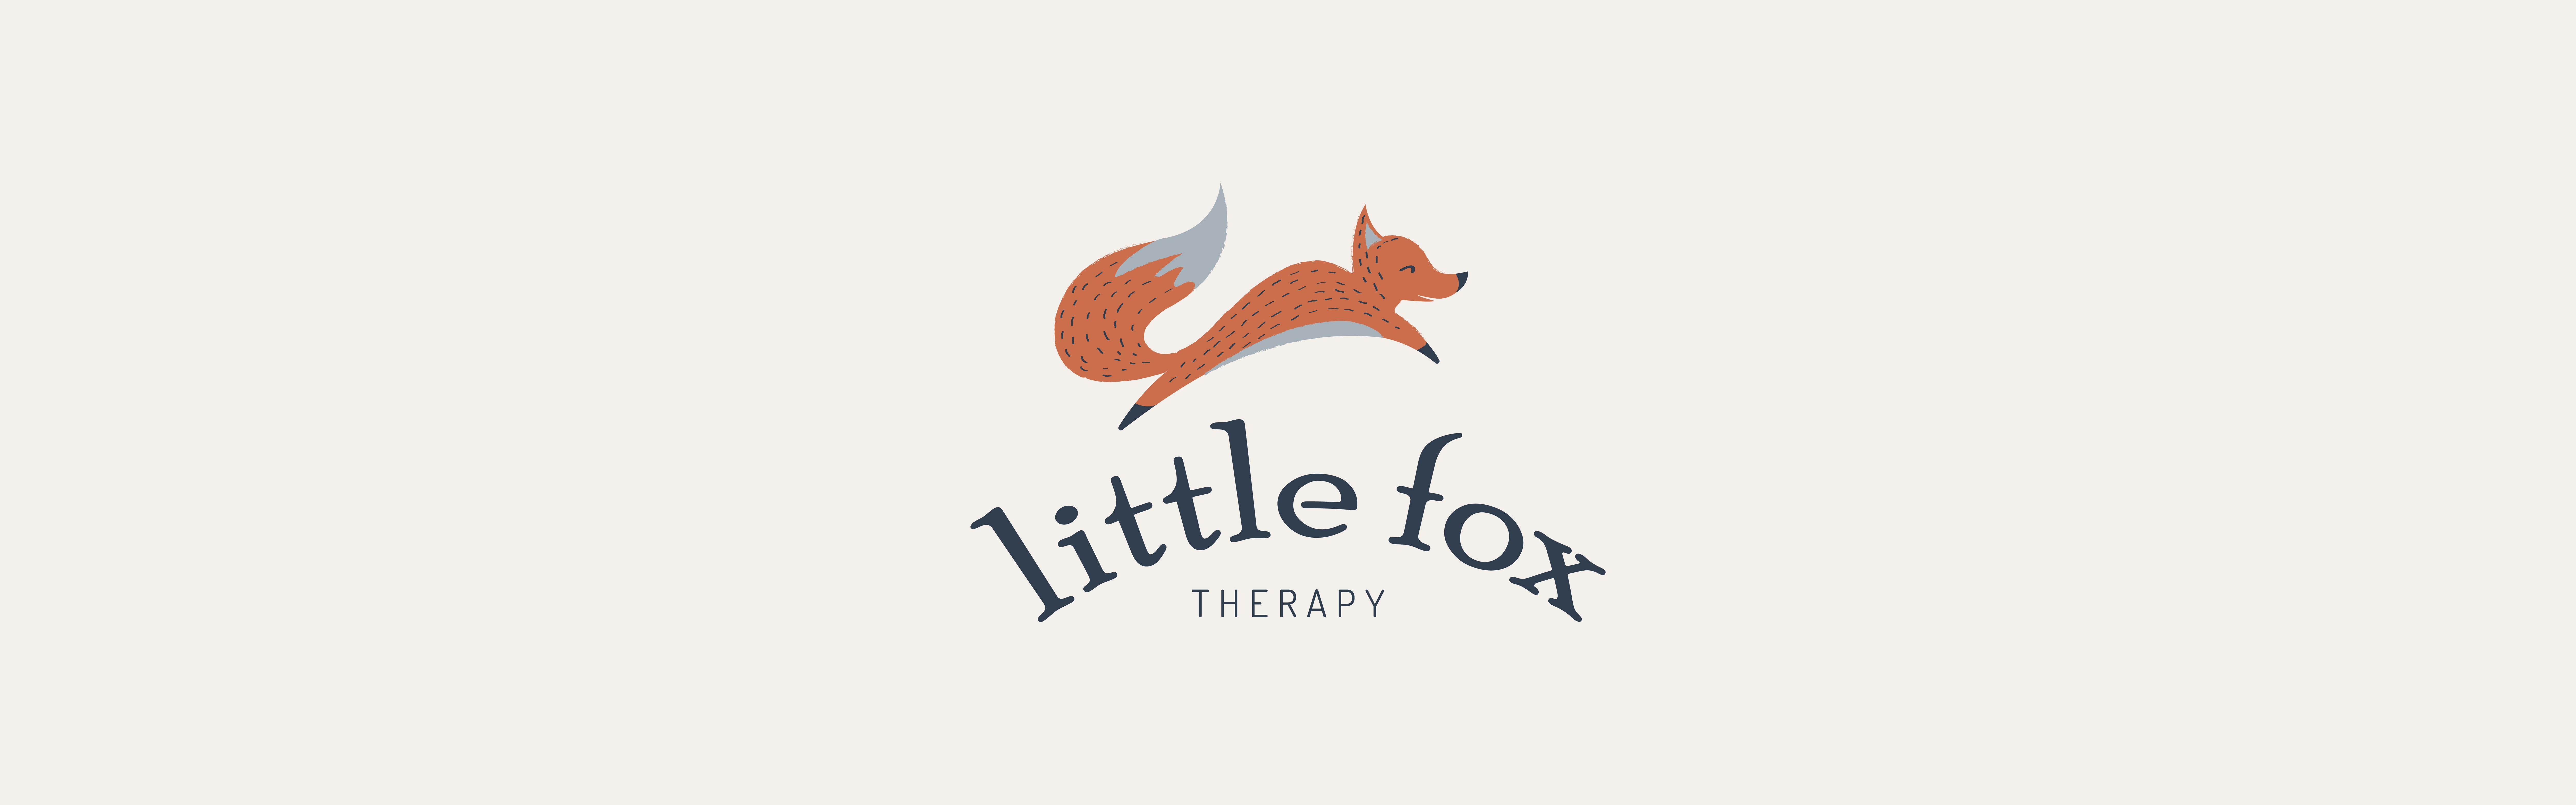 Logo of Little Fox Therapy featuring an illustrated orange fox leaping over the stylized text.